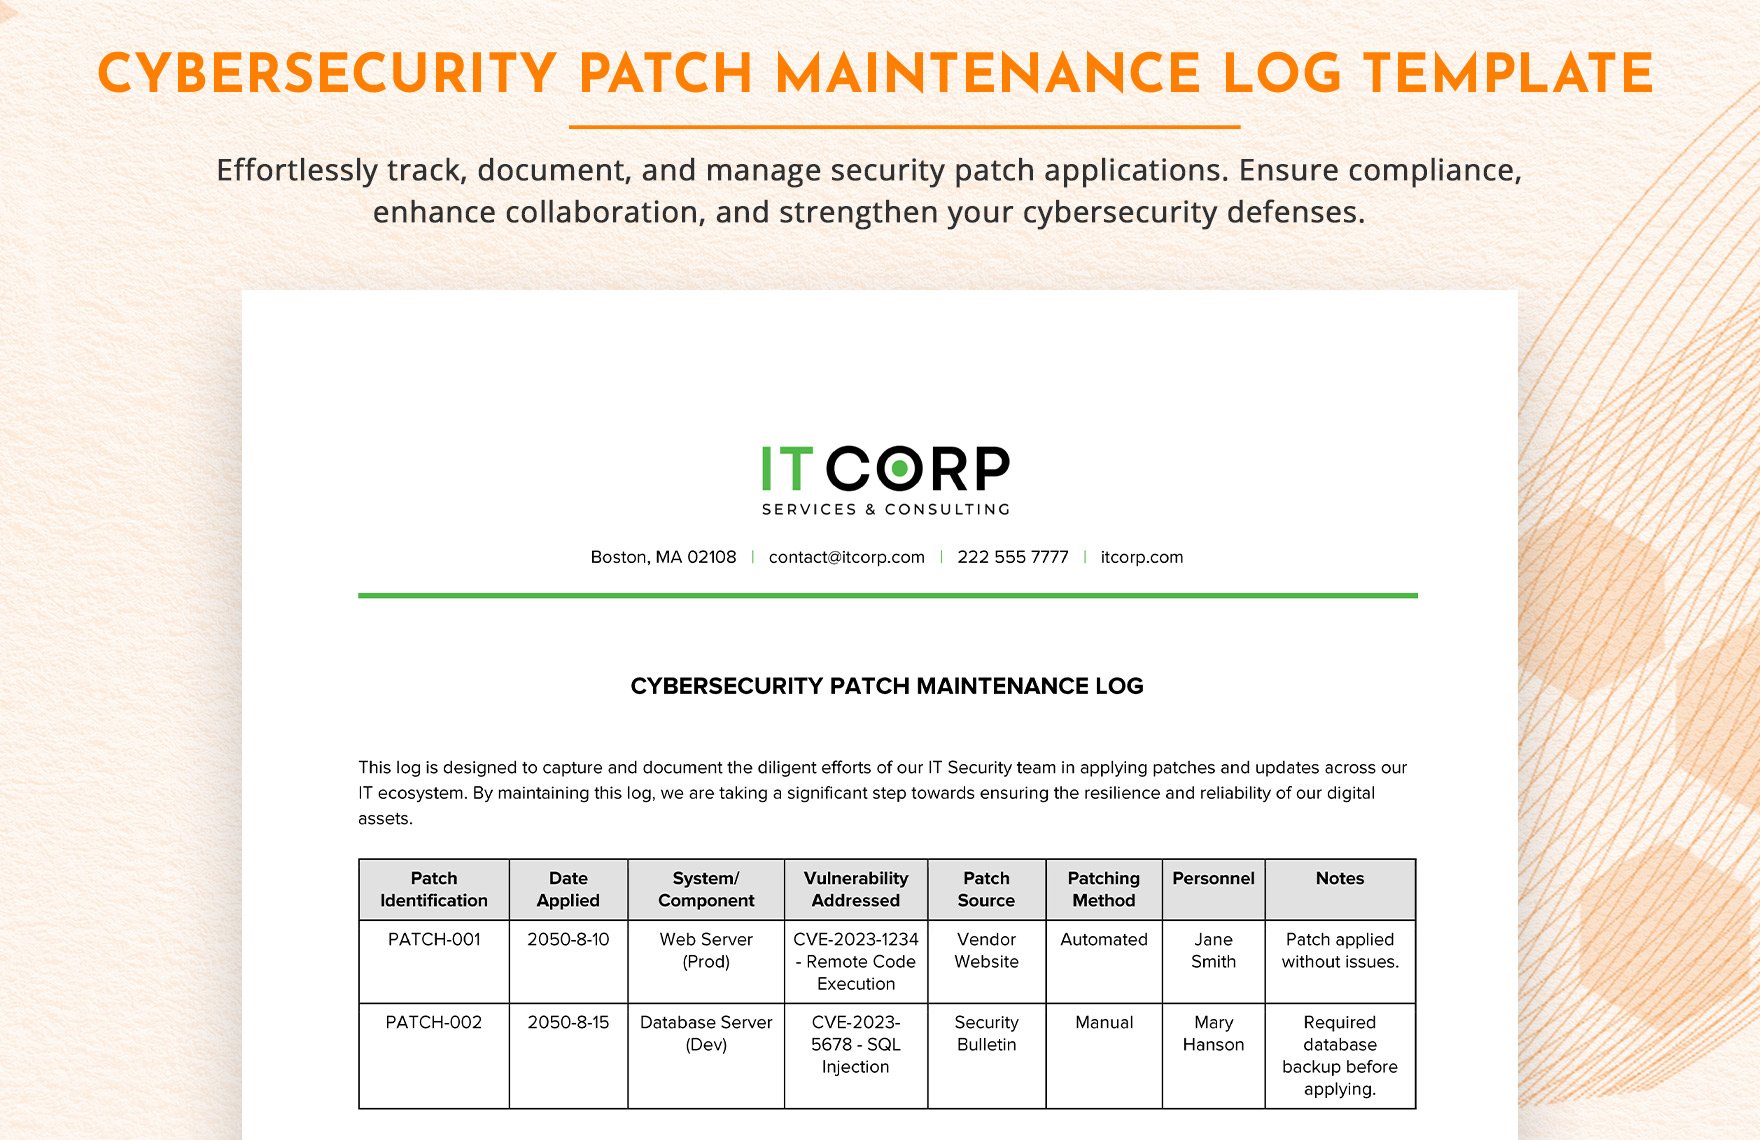 Cybersecurity Patch Maintenance Log Template in Word, Google Docs, PDF